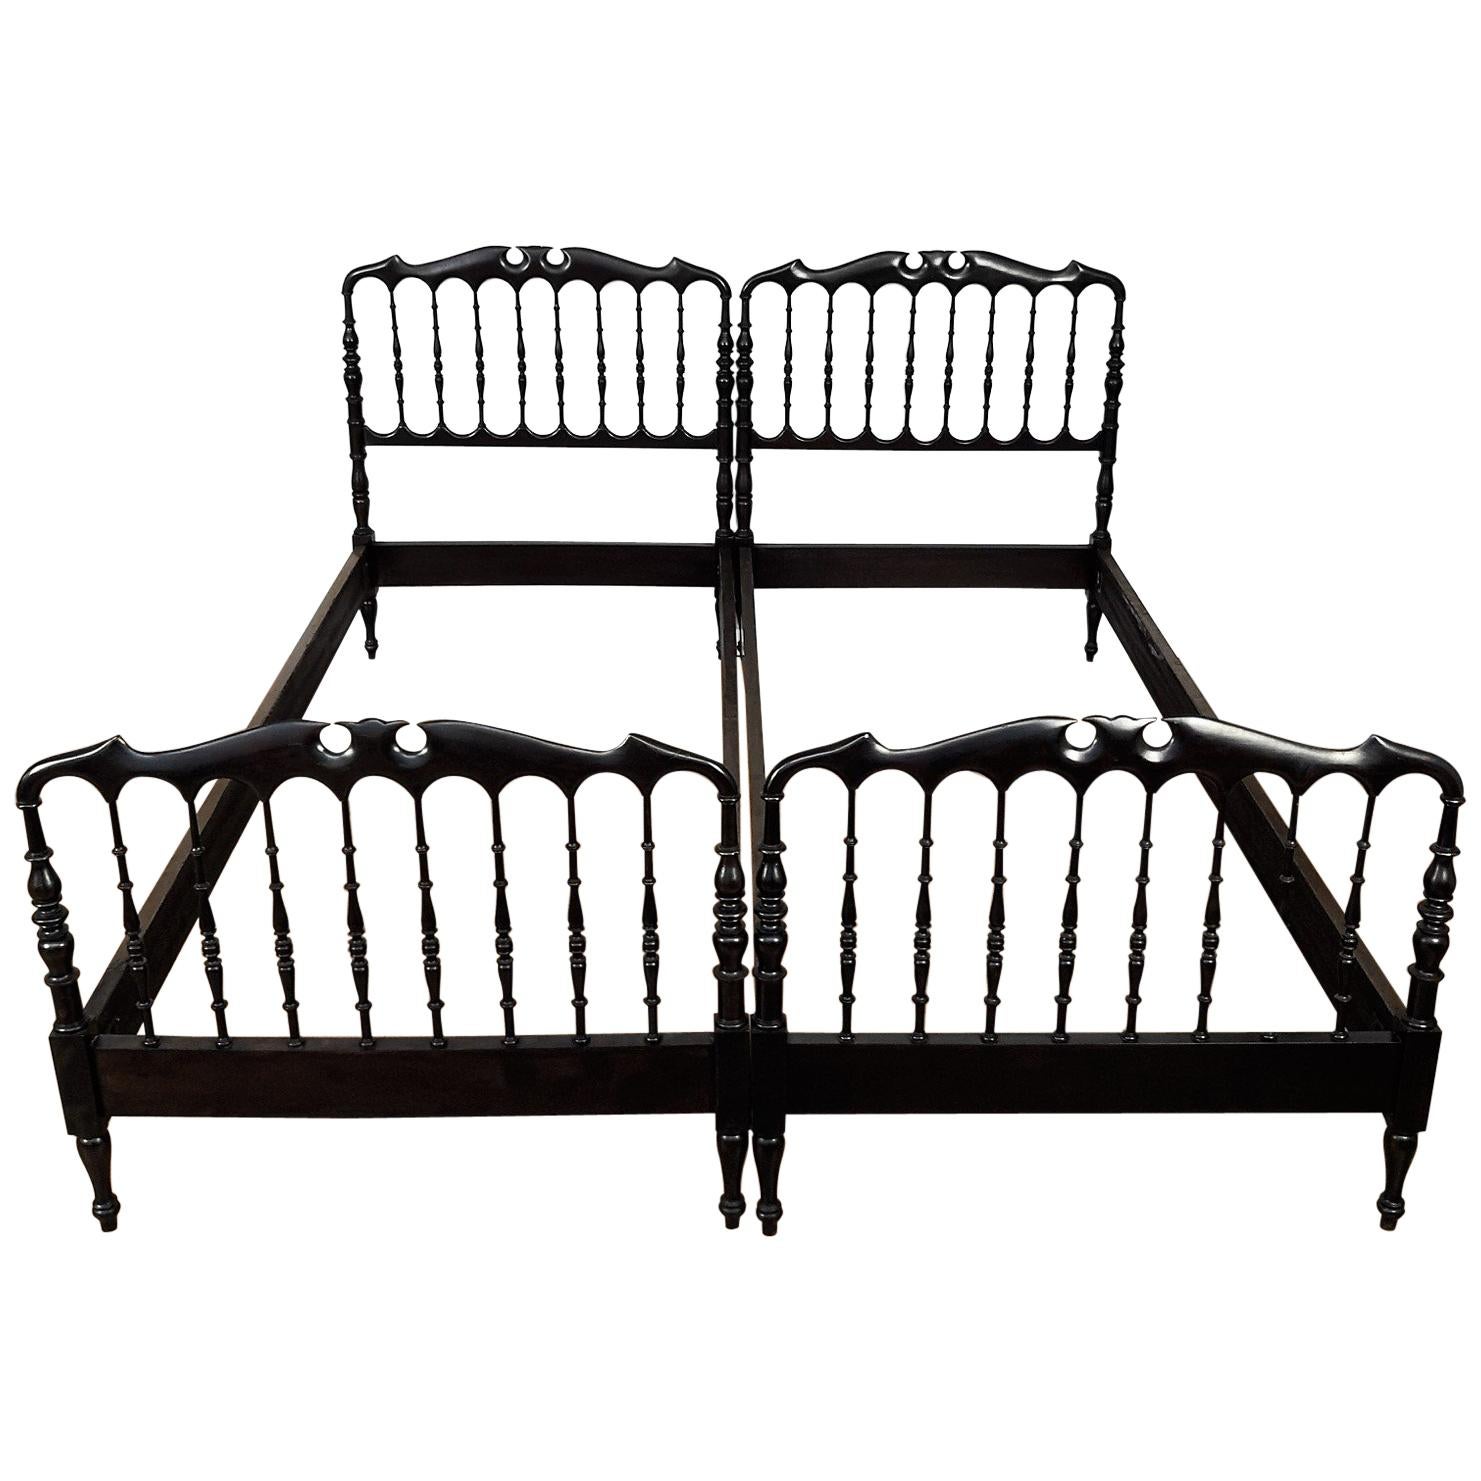 Pair of 1960s Italian Carved Wood Chiavari Single Twin or Queen size Bed Frame